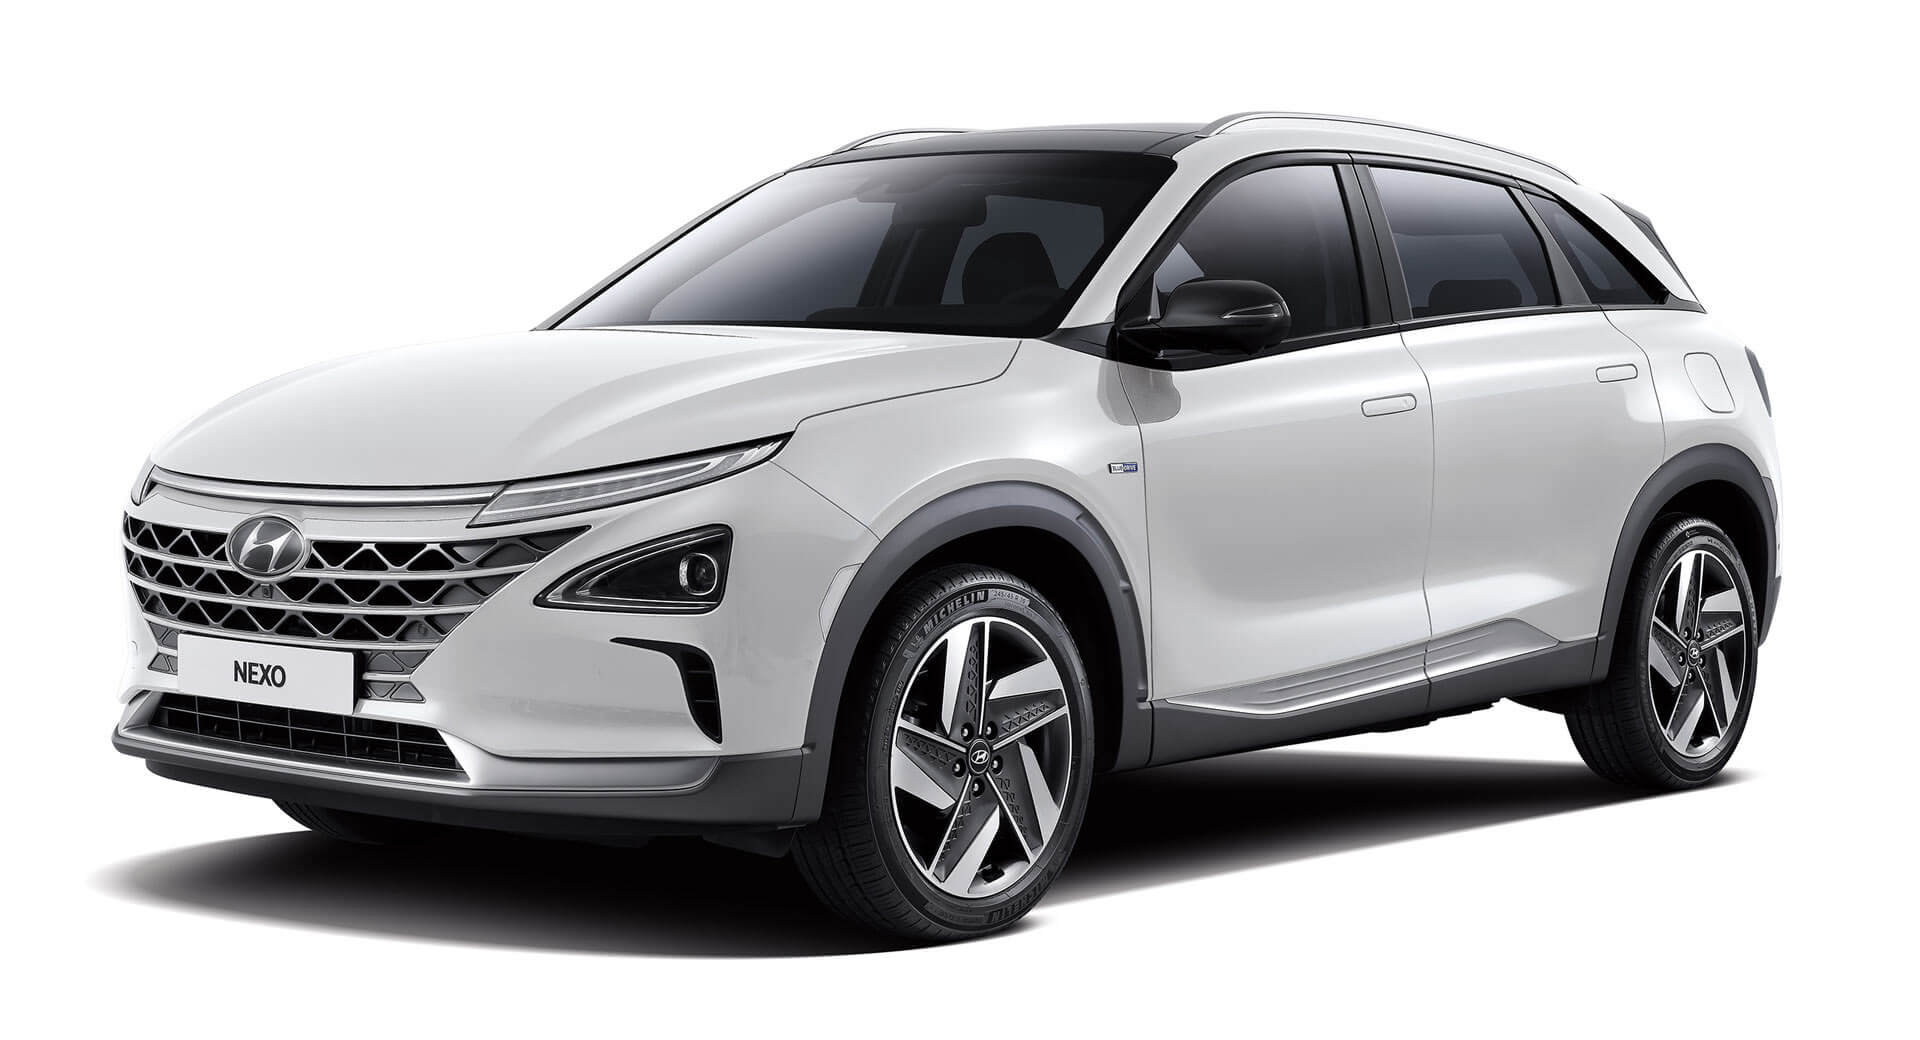 2019 Hyundai Nexo Fuel-Cell Launched In Korea, Starts From $31,000 |  Carscoops